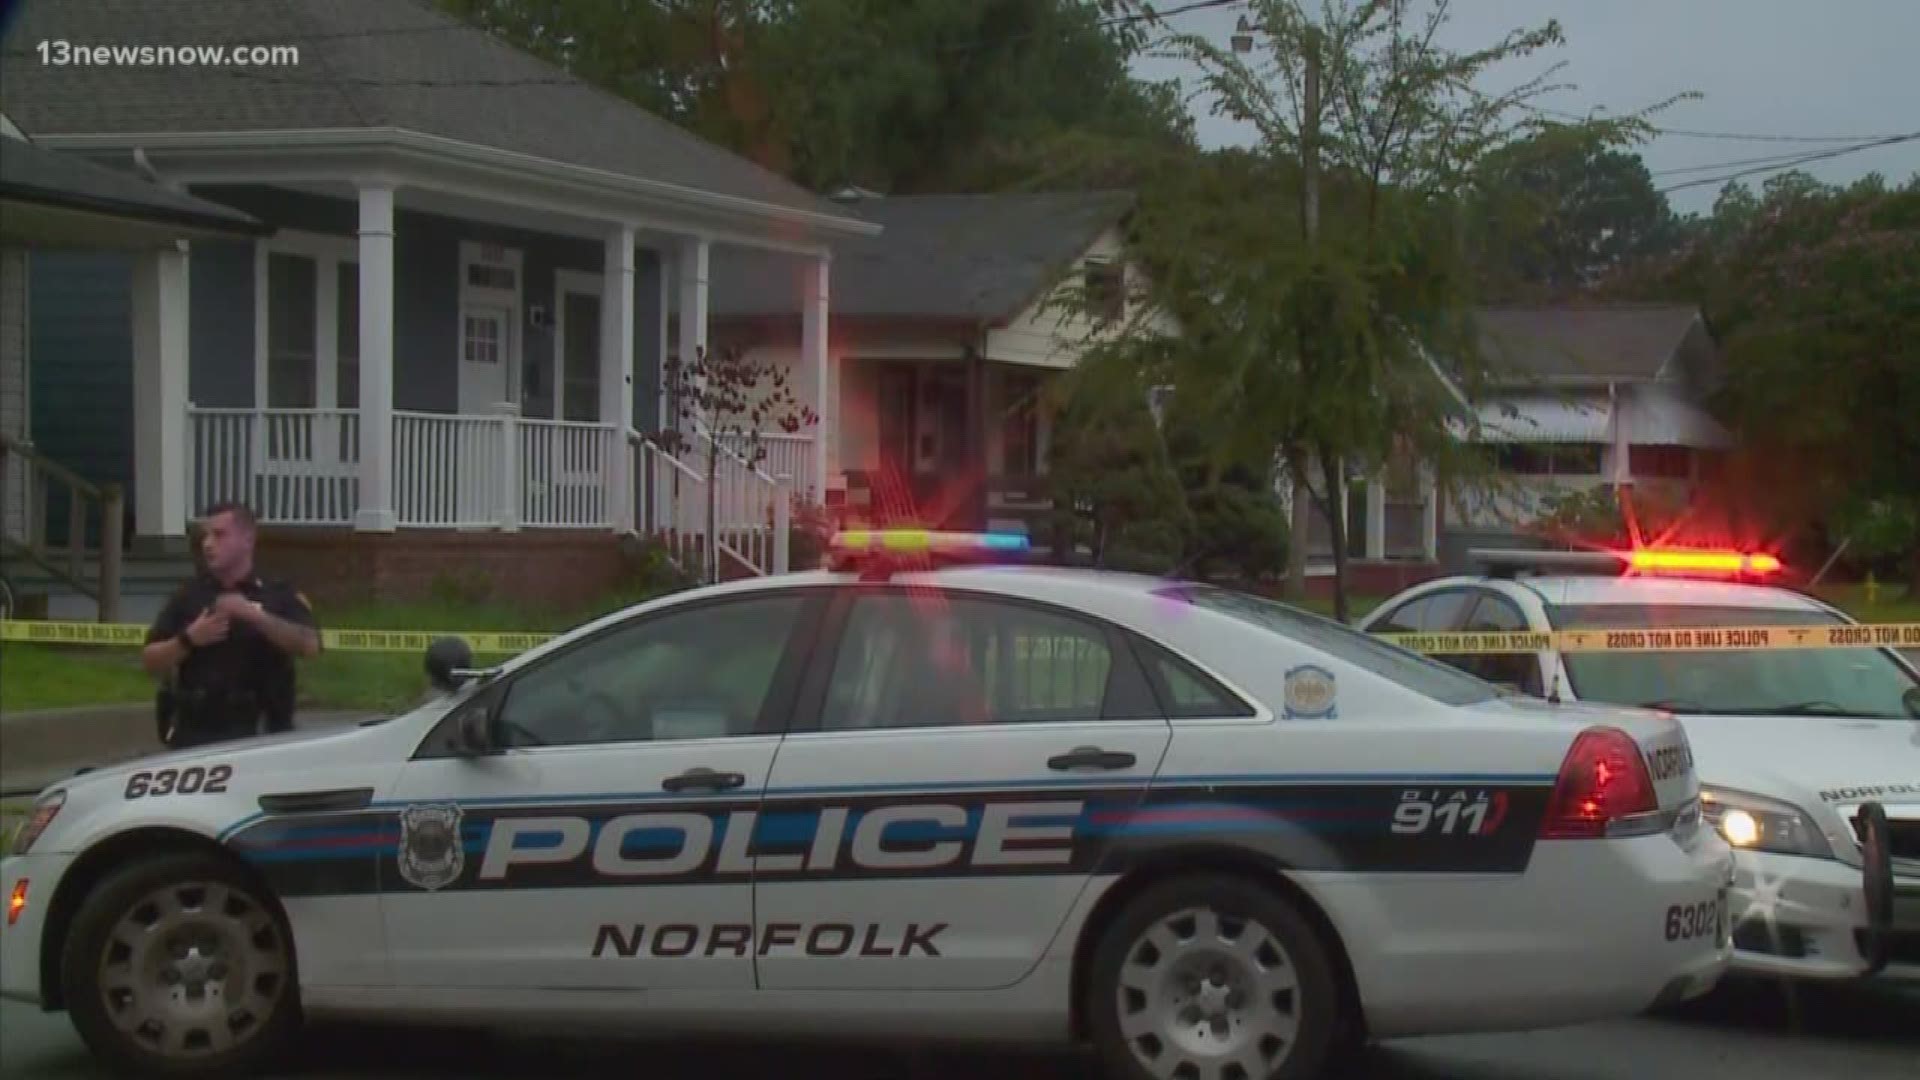 The Norfolk Police Department released the names of two men that were killed in Norfolk Tuesday night. Police said 39-year-old Percell W. Williams and 39-year-old Kenny A. Williams both died from injuries in the same shooting.